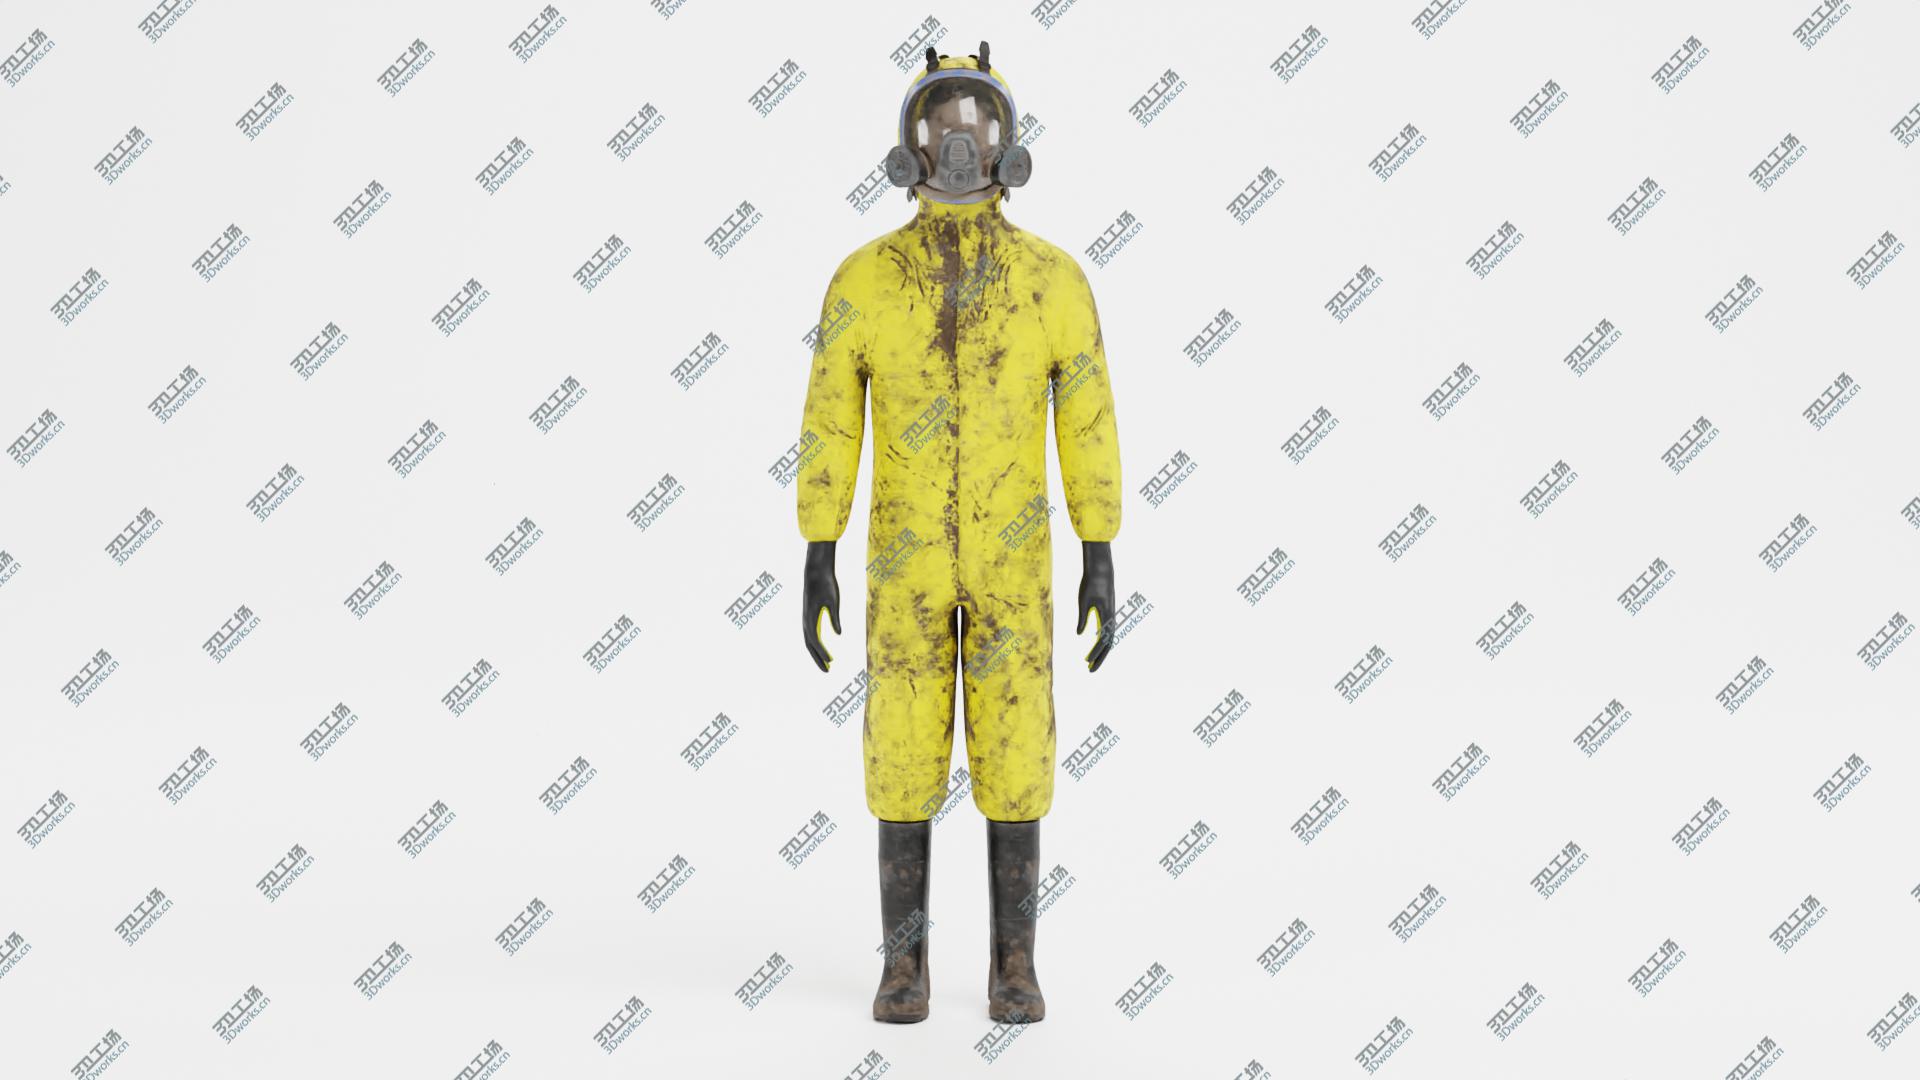 images/goods_img/202104093/3D Protective Suit 2 model/2.jpg